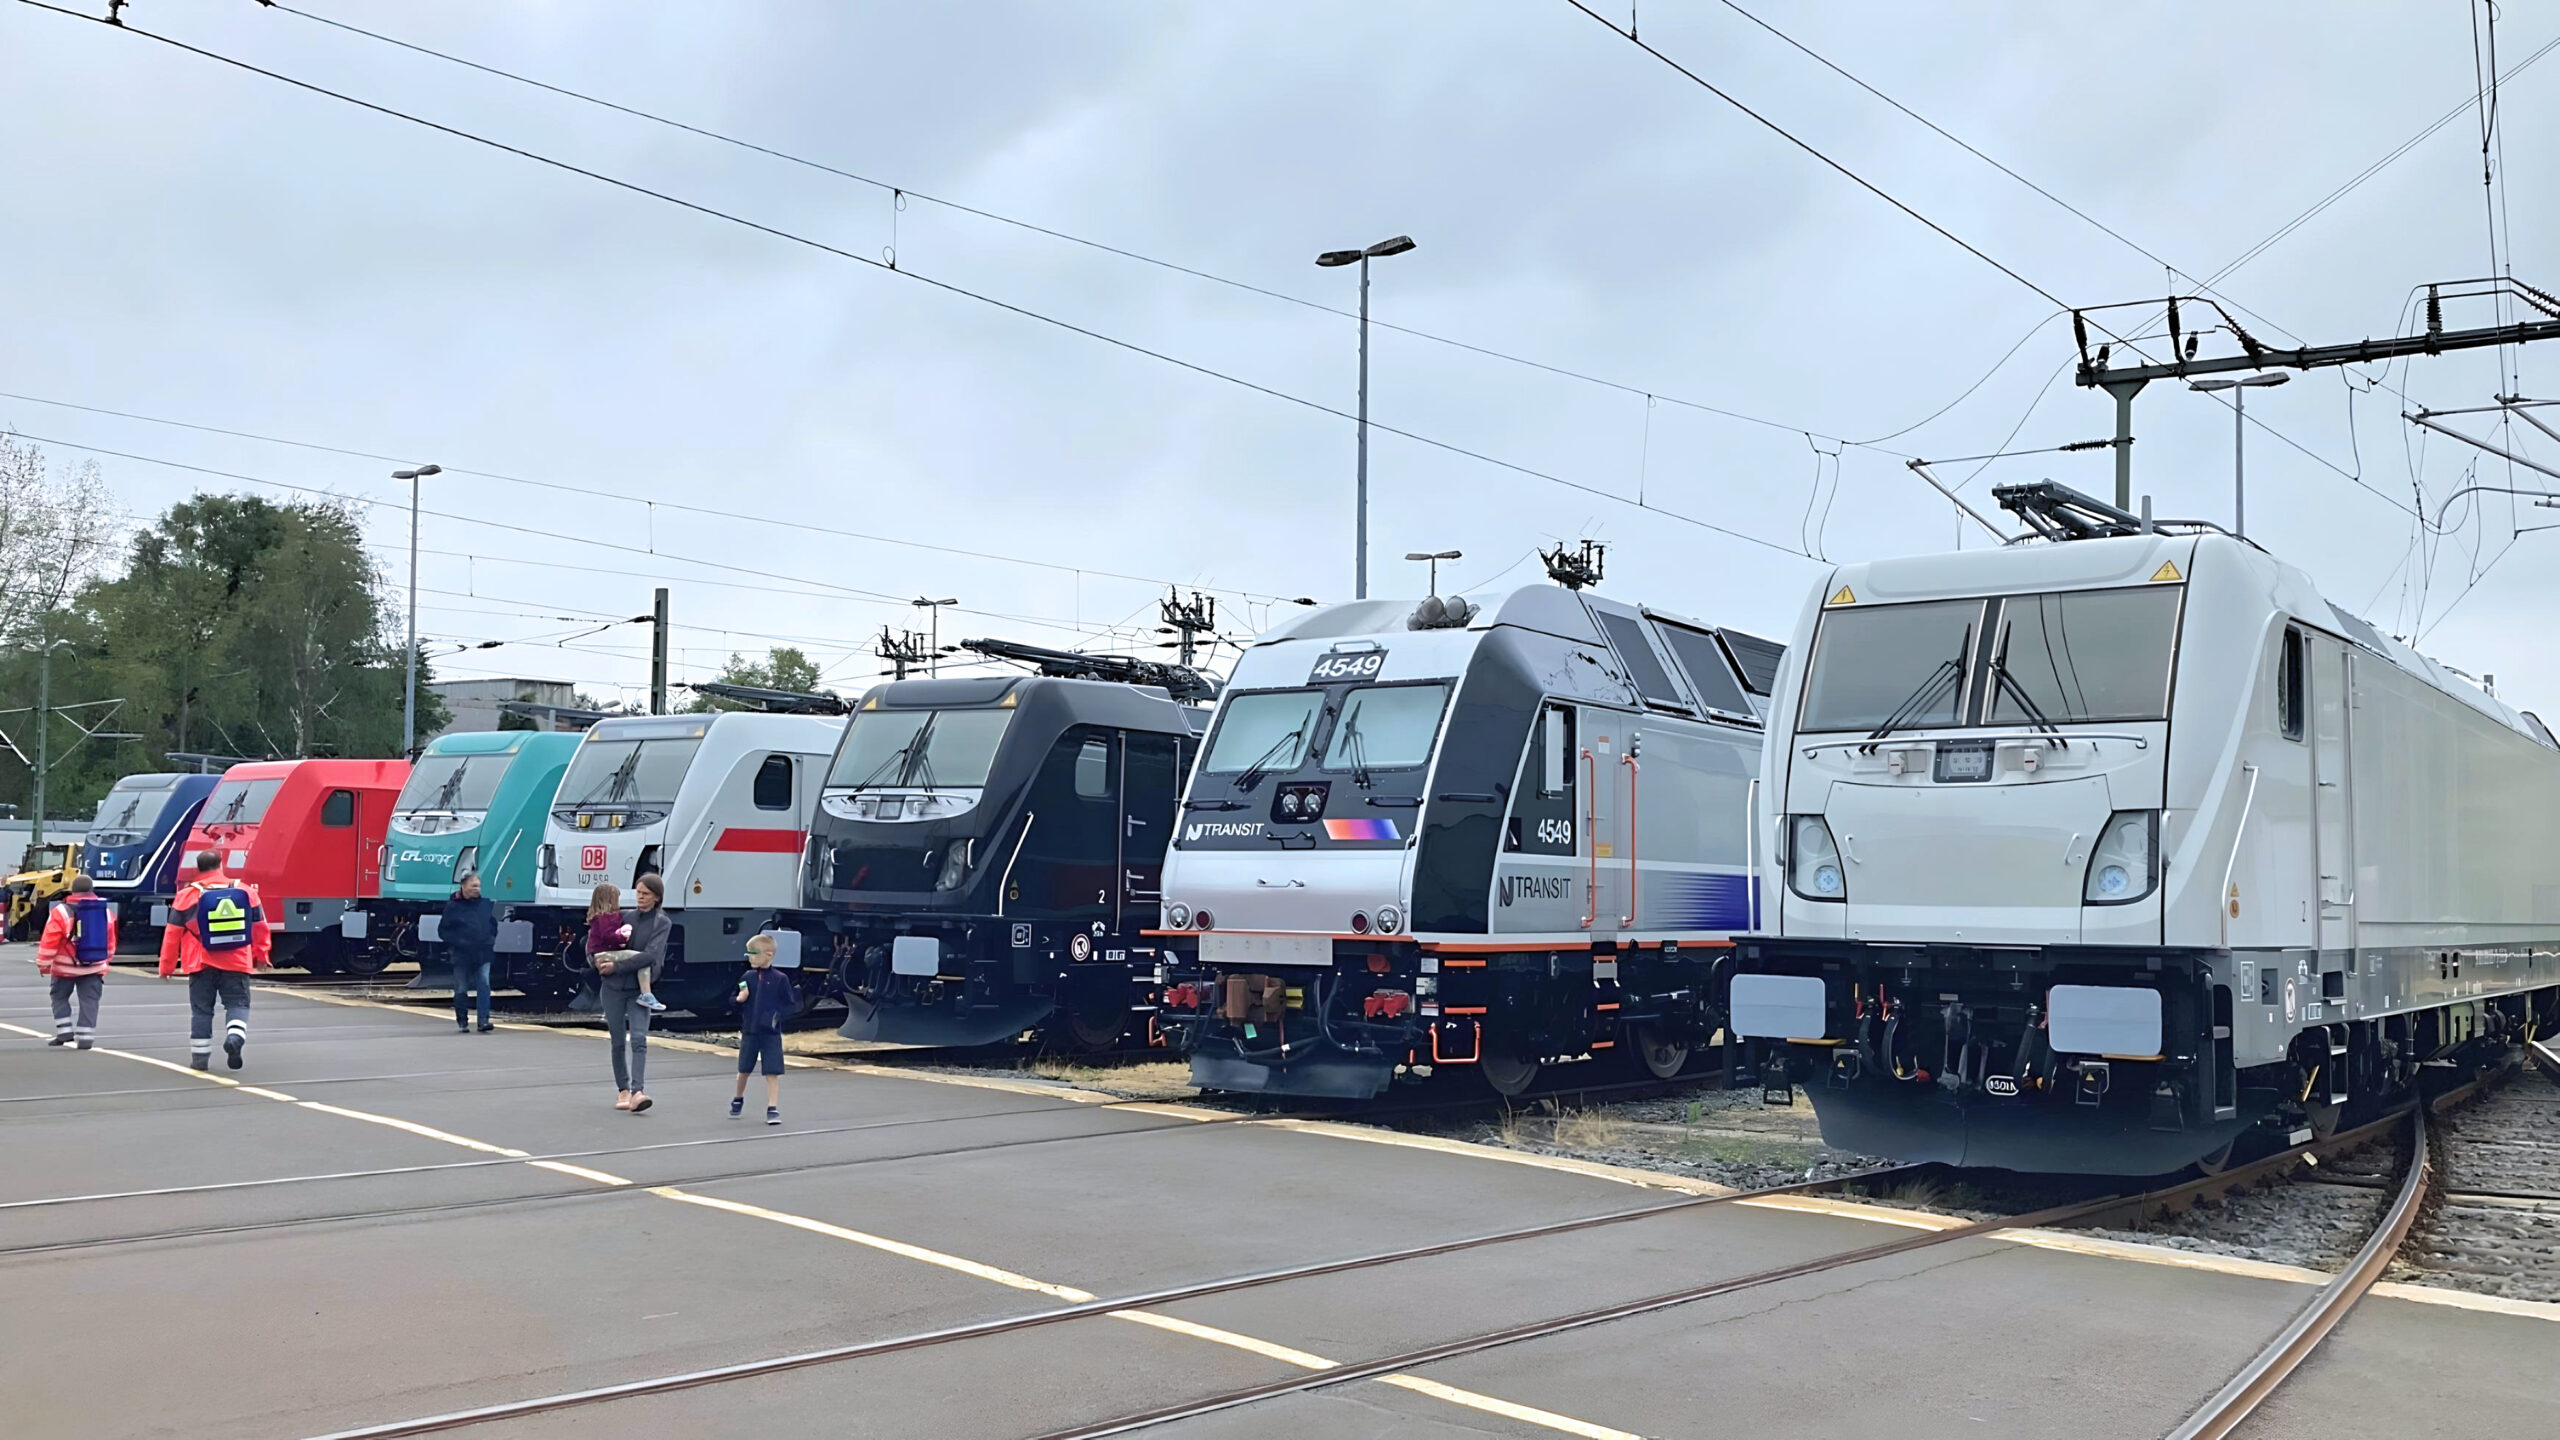 Alstom’s locomotive exhibition marking 175 years of locomotive manufacturing at Kassel, Germany, July 2023. Left to right: Traxx MS3 for ČD Cargo, Traxx AC2 for DB, Traxx MS3 for CFL Cargo, Traxx AC3 for DB, Traxx MS3 for TX Logistik, ALP-45DP for New Jersey Transit, and Traxx MS3 for Akiem